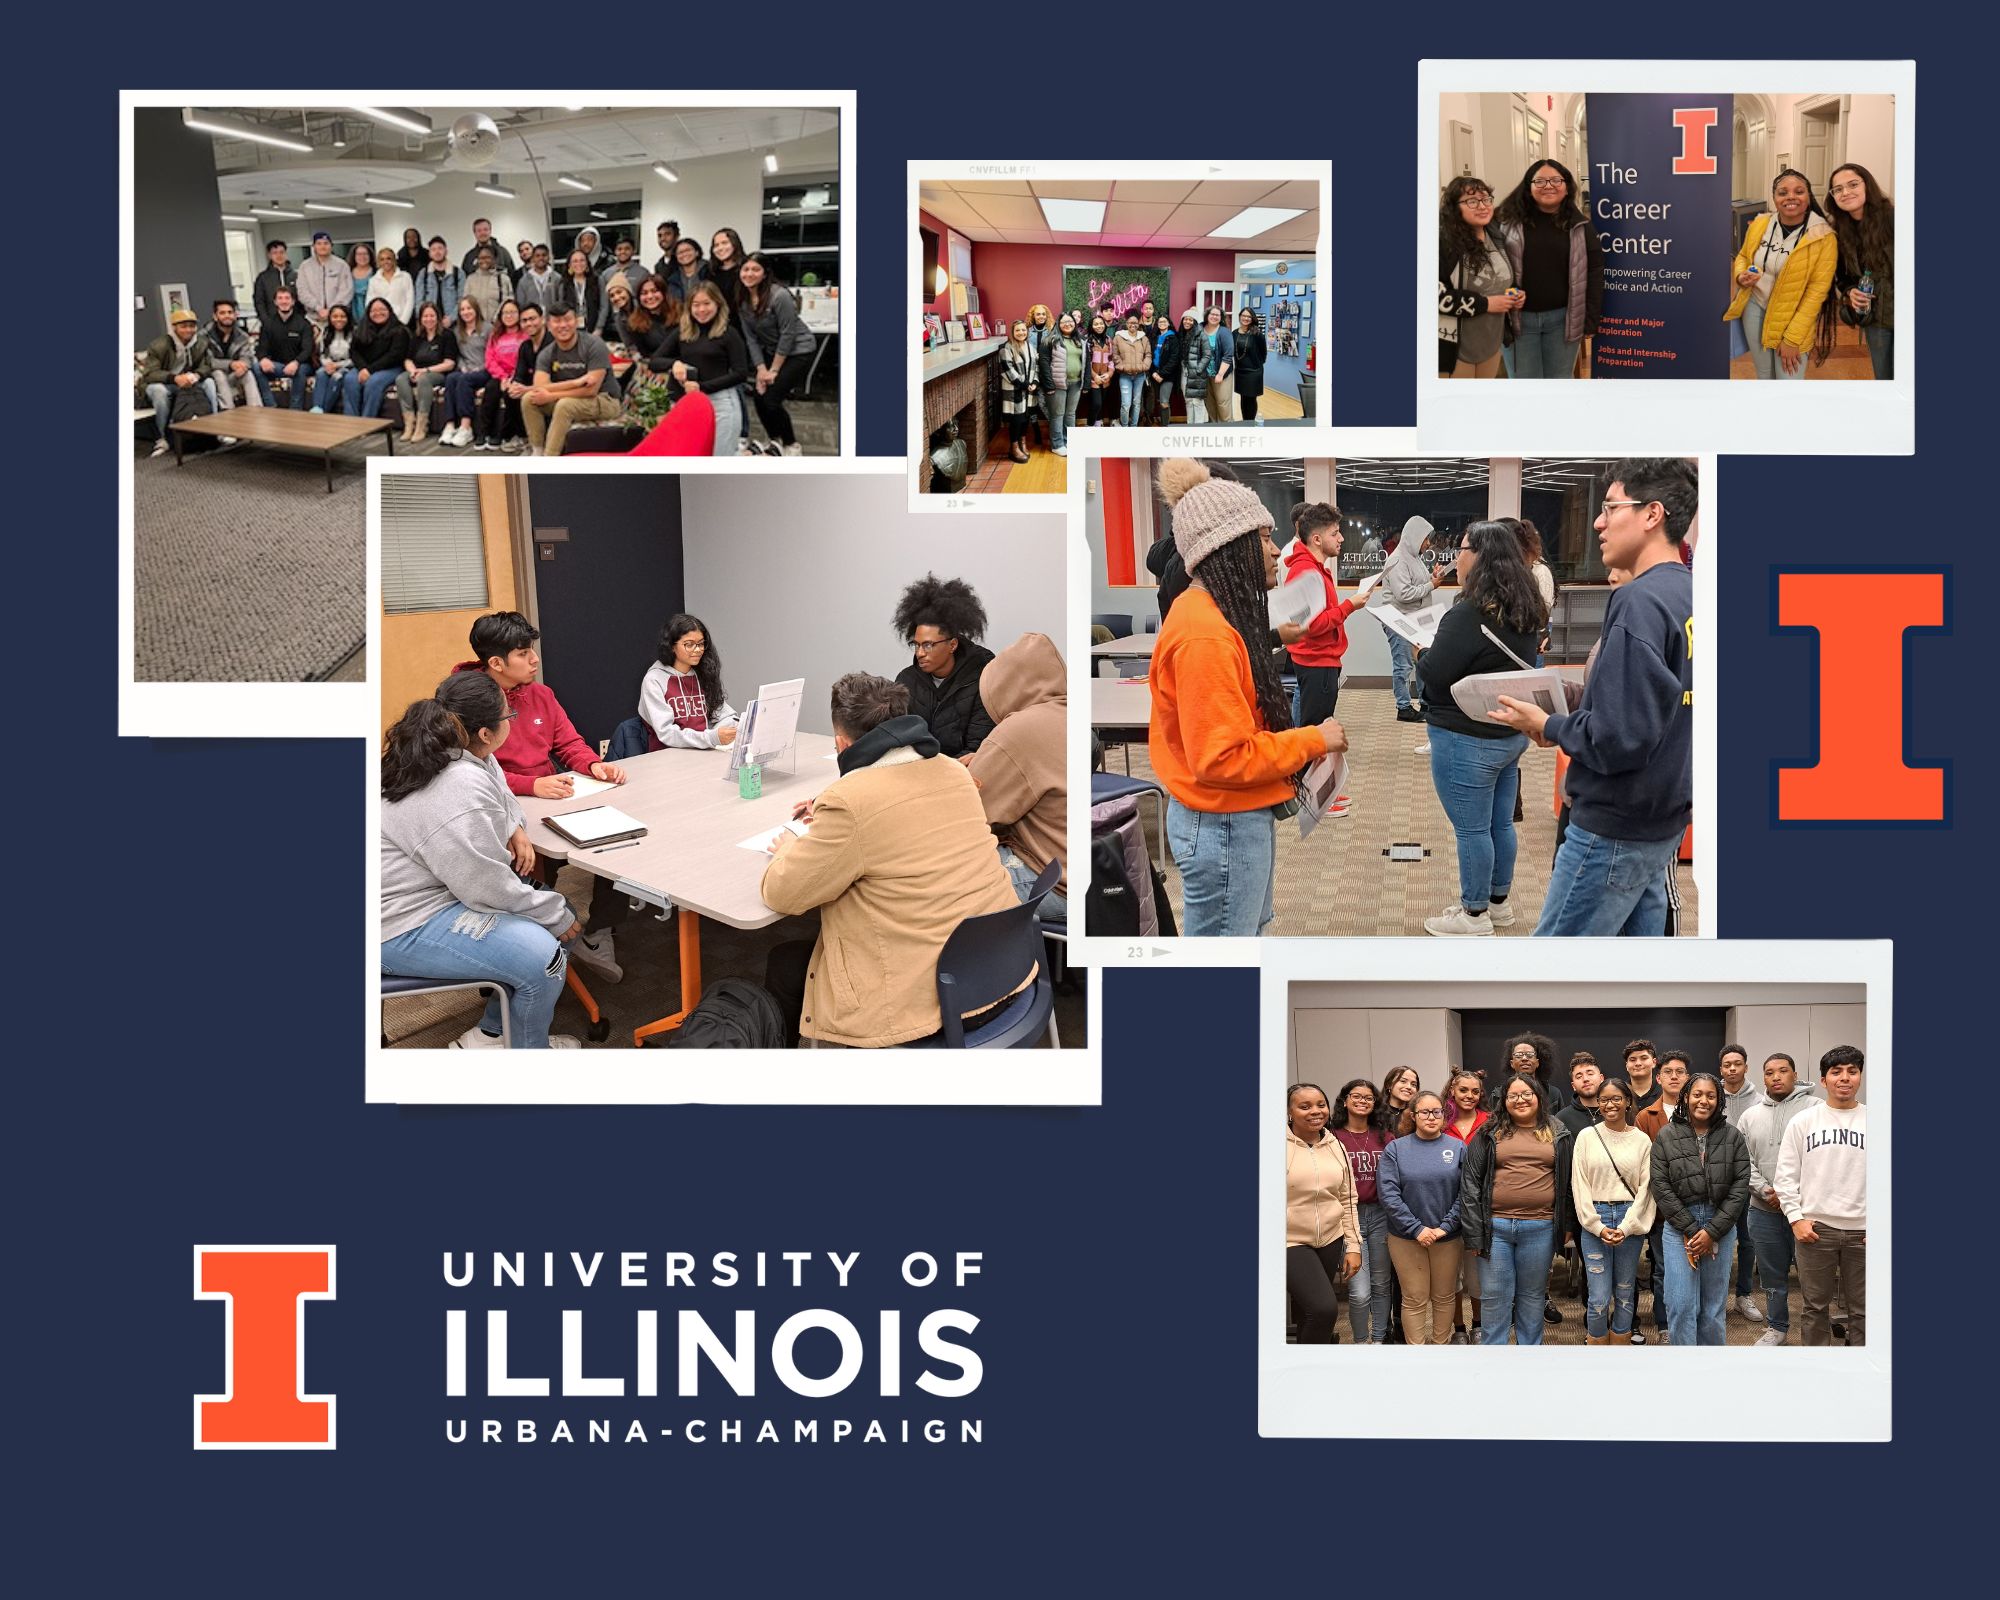 Photo Collage of FOCUS student participants participating in various activities. Includes University of Illinois logo.